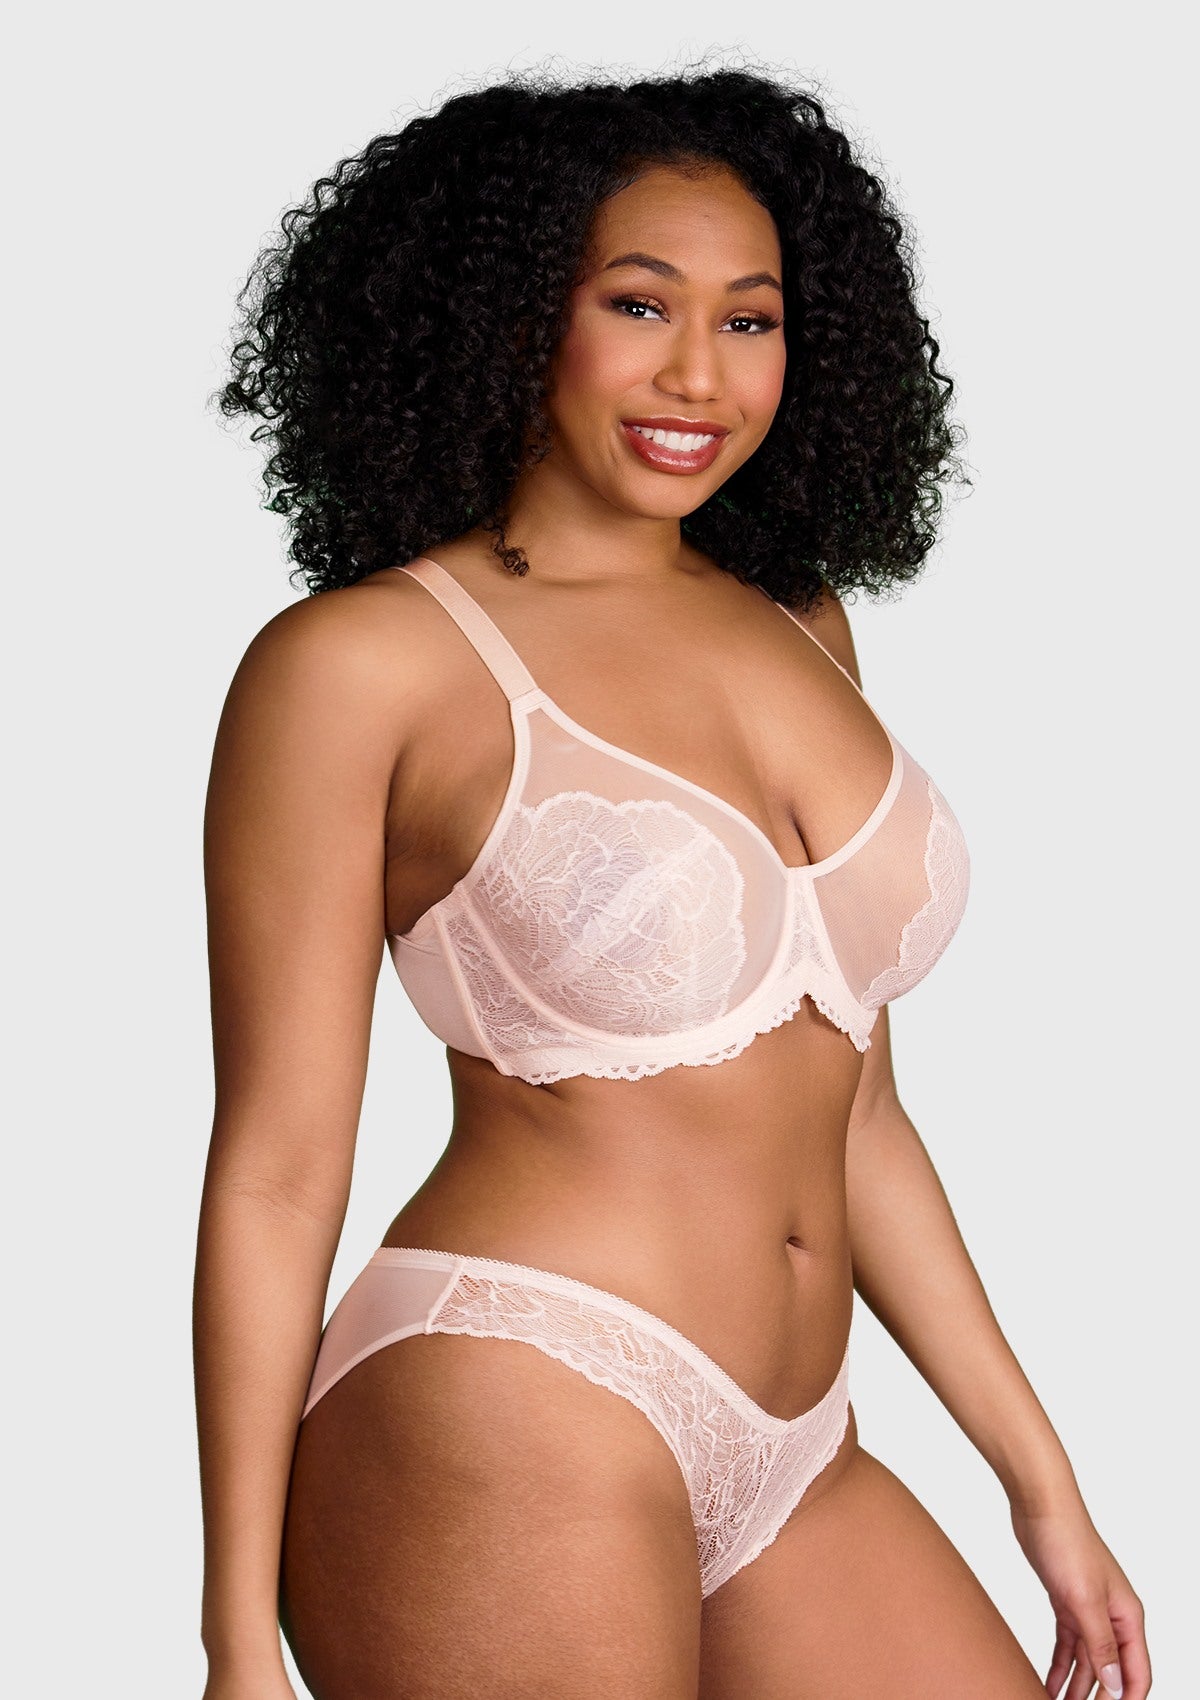 HSIA Blossom Sheer Lace Bra: Comfortable Underwire Bra For Big Busts - Dusty Peach / 42 / H